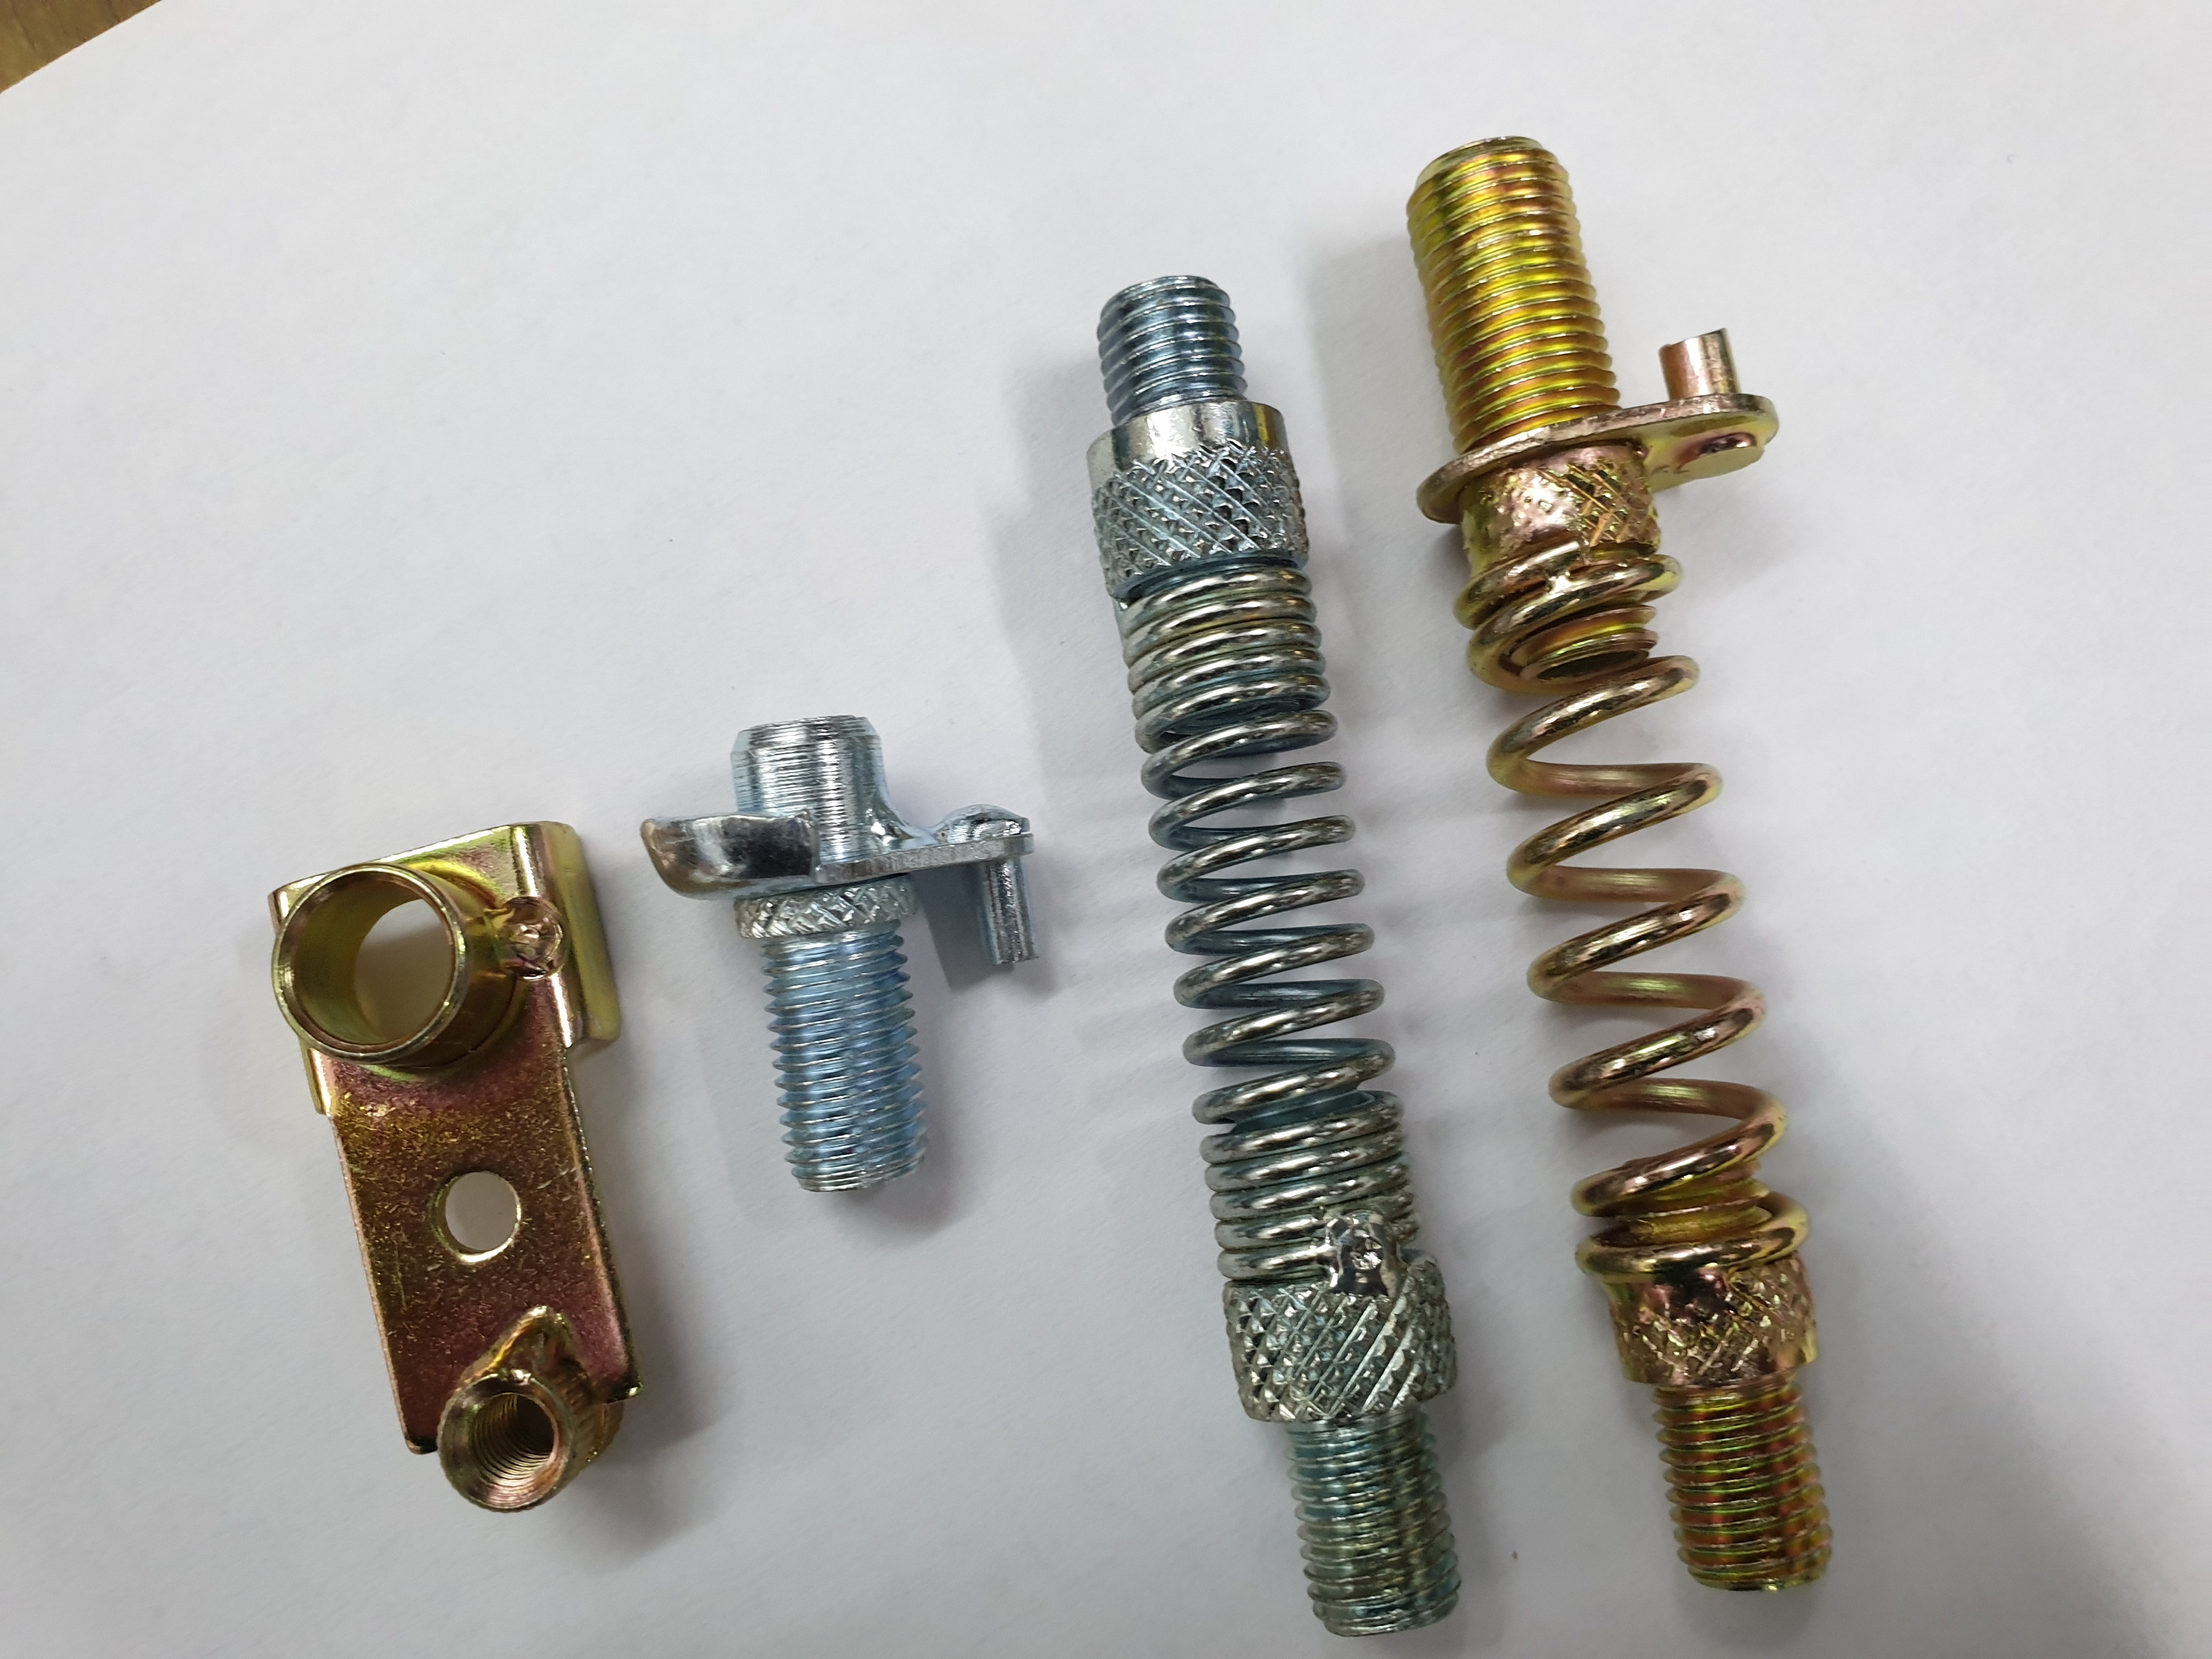 Indicator Springs and Insert Bolts